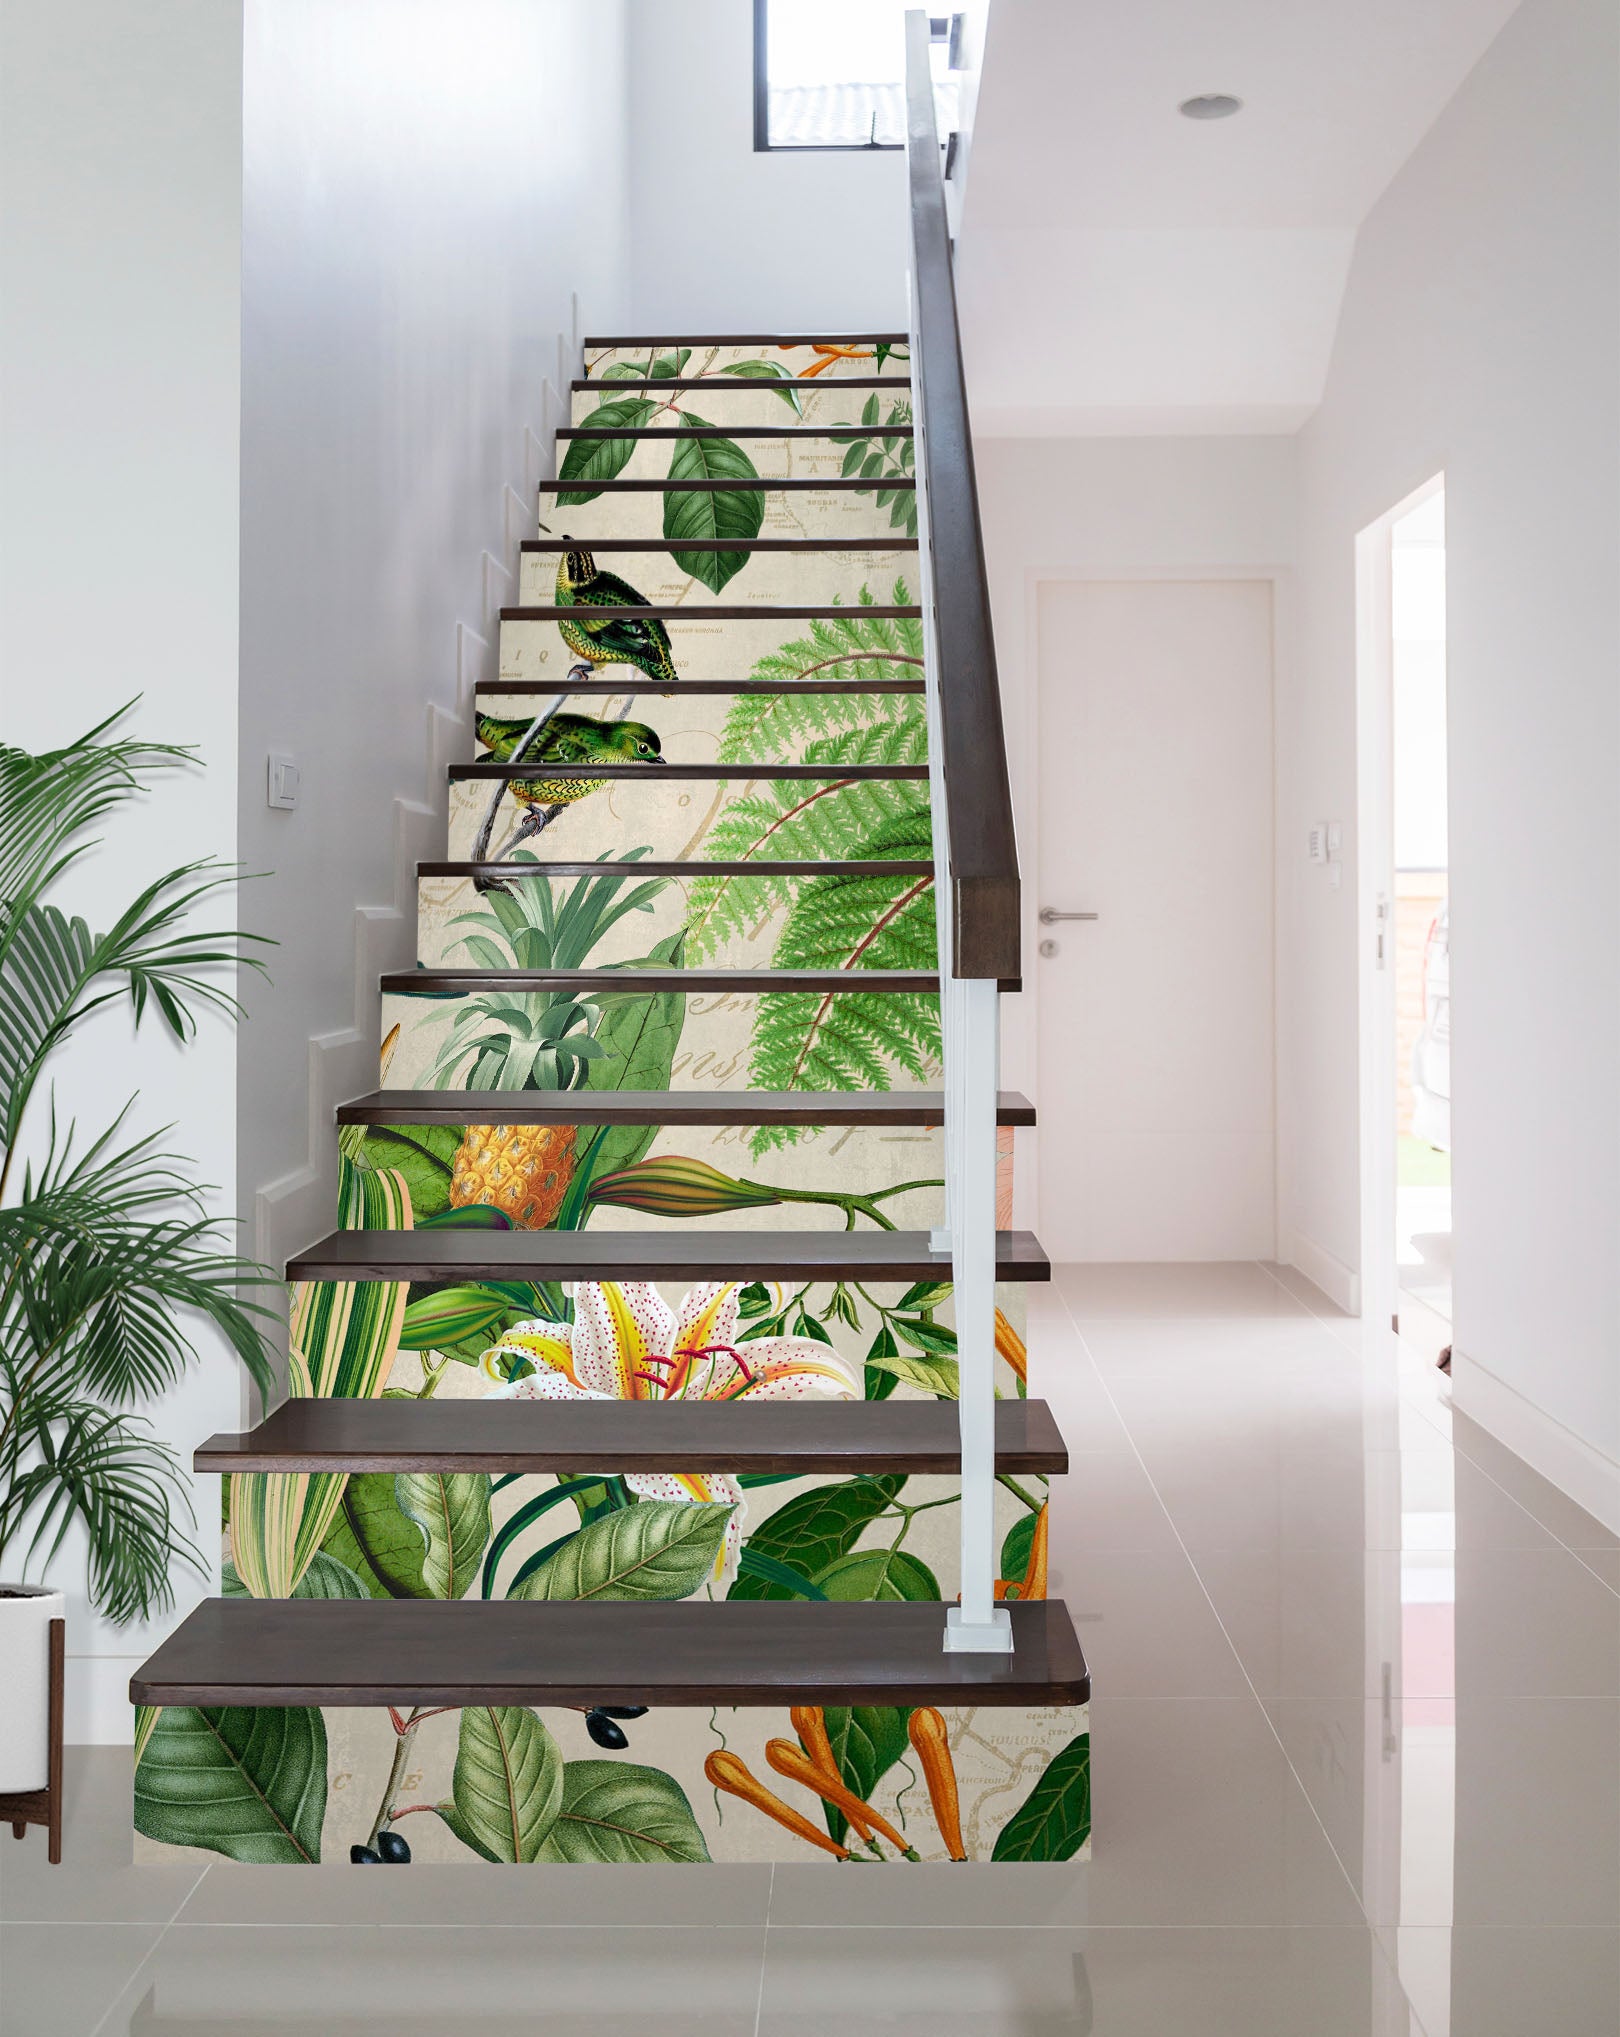 3D Pineapple Grove 11021 Andrea Haase Stair Risers